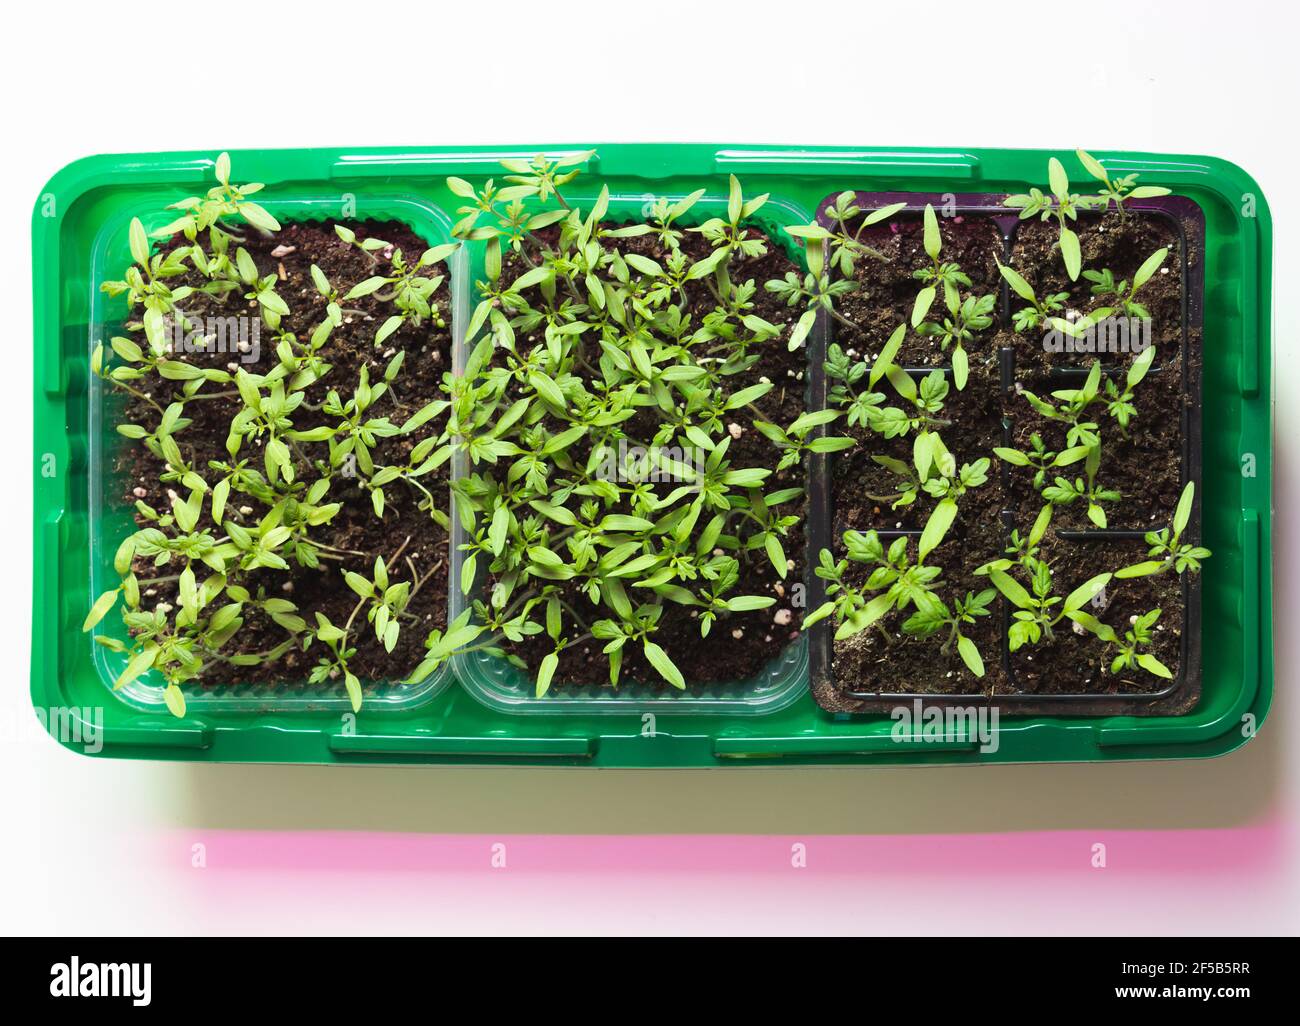 Green plastic box with growing plant seedlings stands under full spectrum phyto lamp illumination. Top view photo Stock Photo